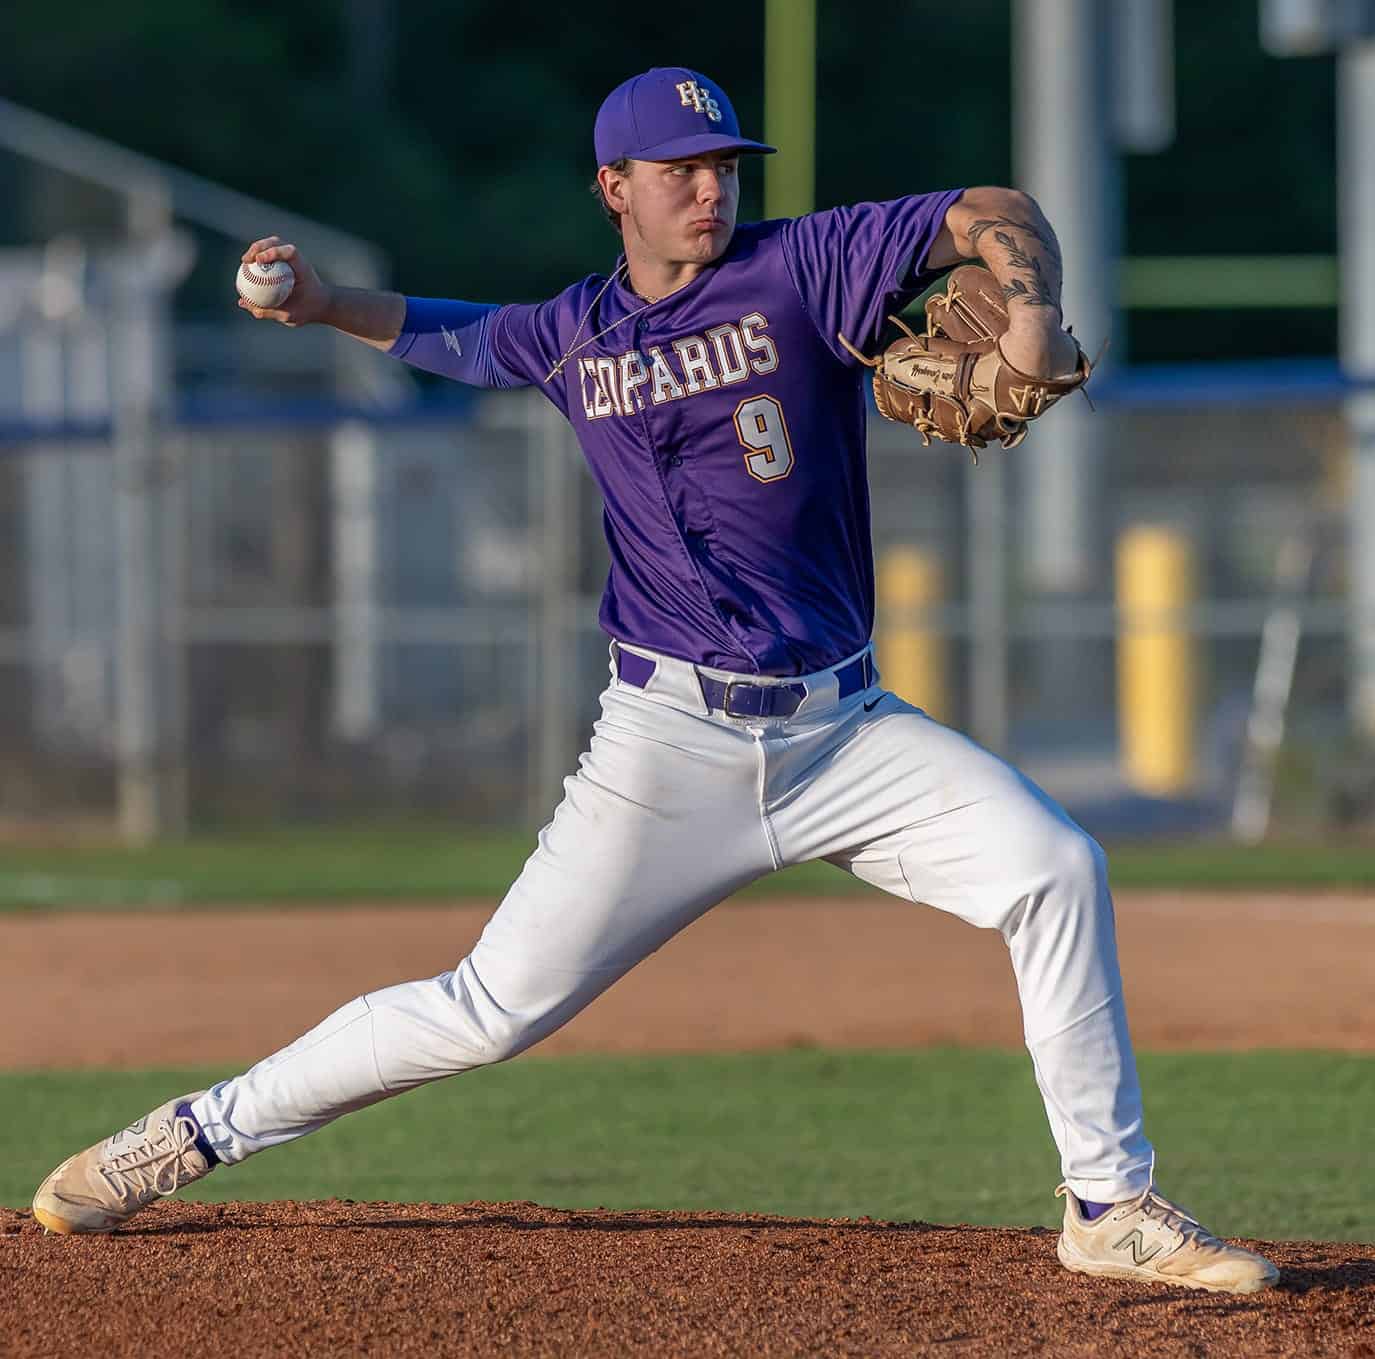 Hernando High’s Carter Caraynoff took the mound in the away game against Central High Friday in Brooksville. Photo by [Joseph Dicristofalo]